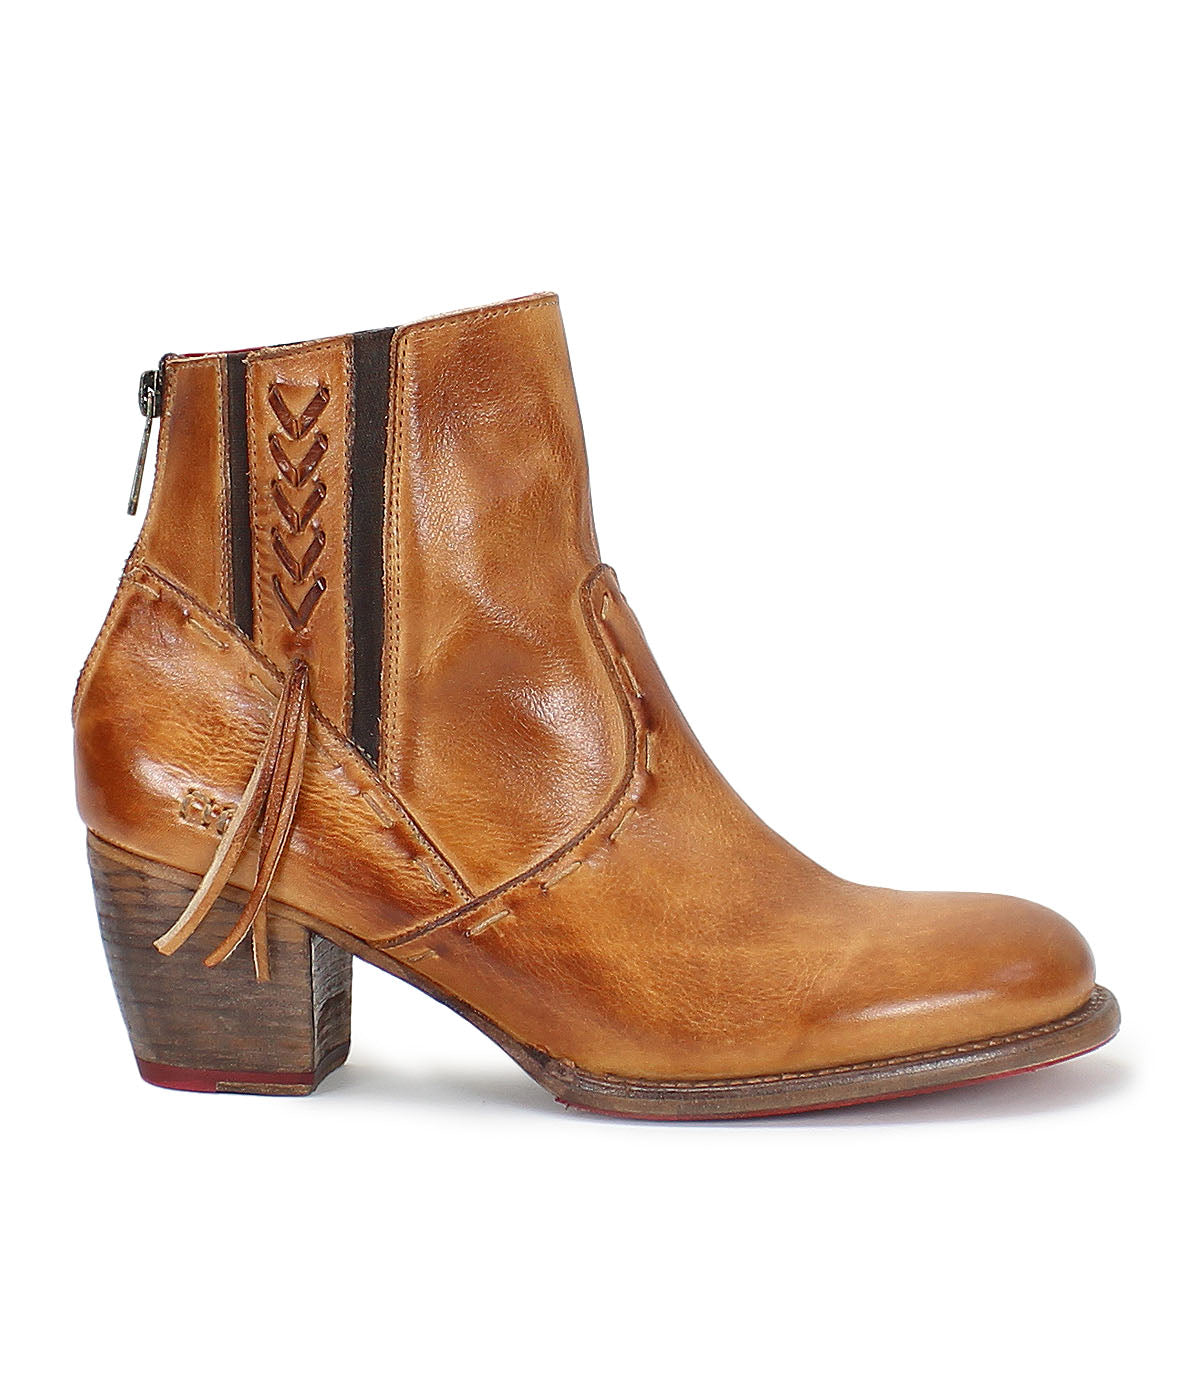 A Celestine ankle boot by Bed Stu, made in tan leather.